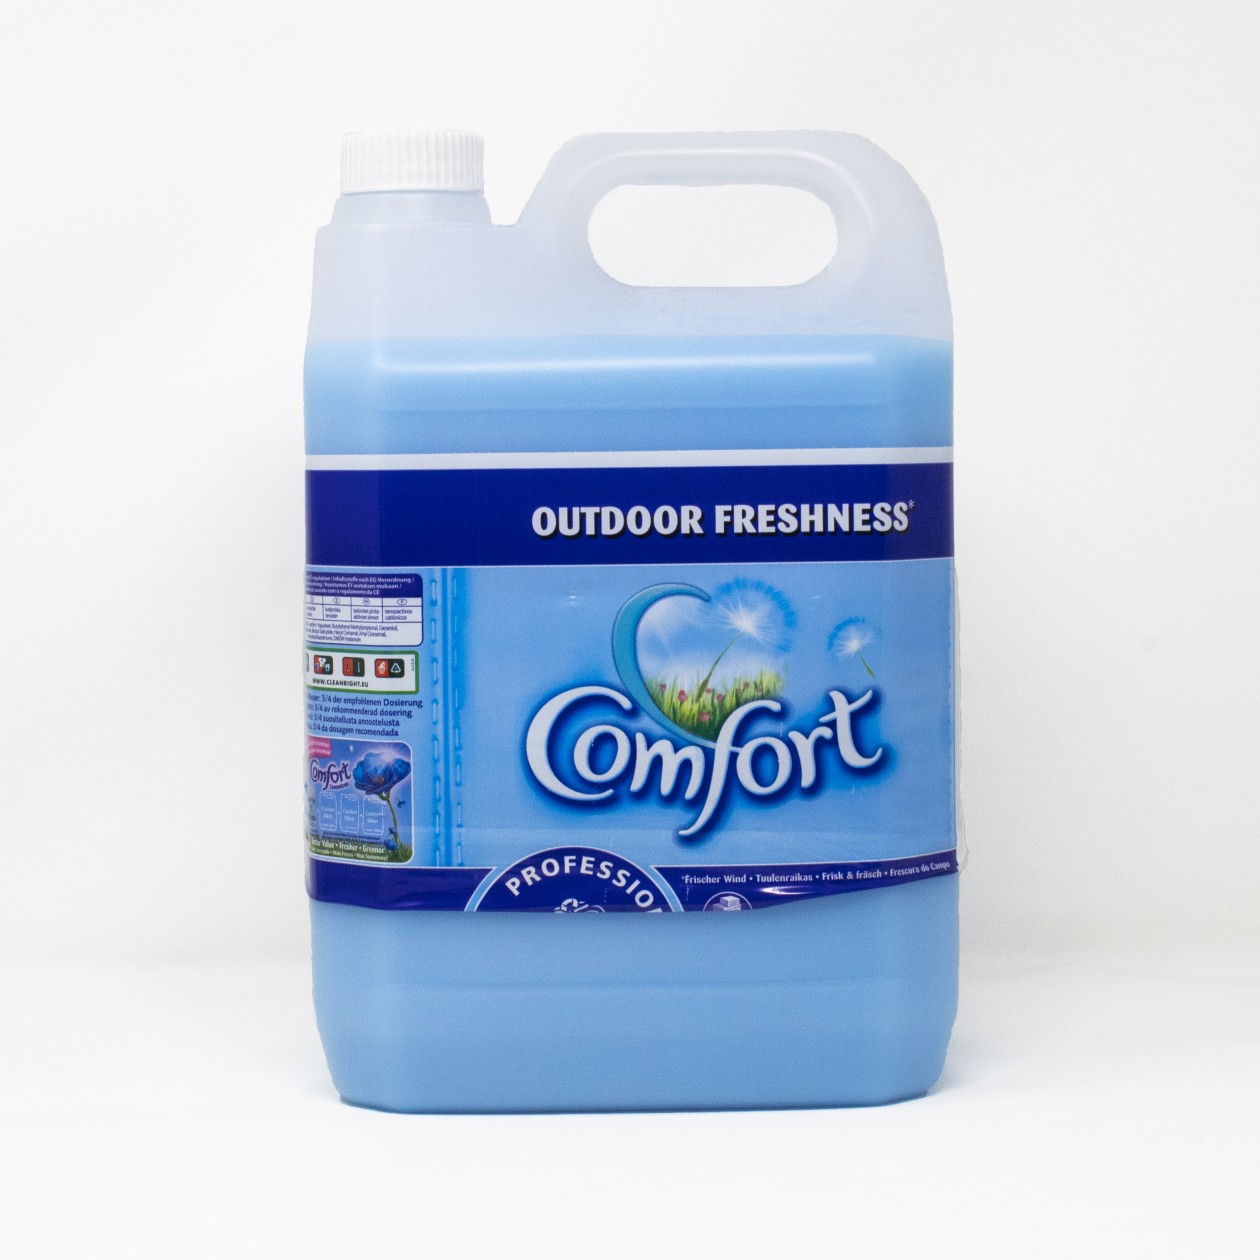 Comfort Outdoor Freshness Fabric Conditioner 5l